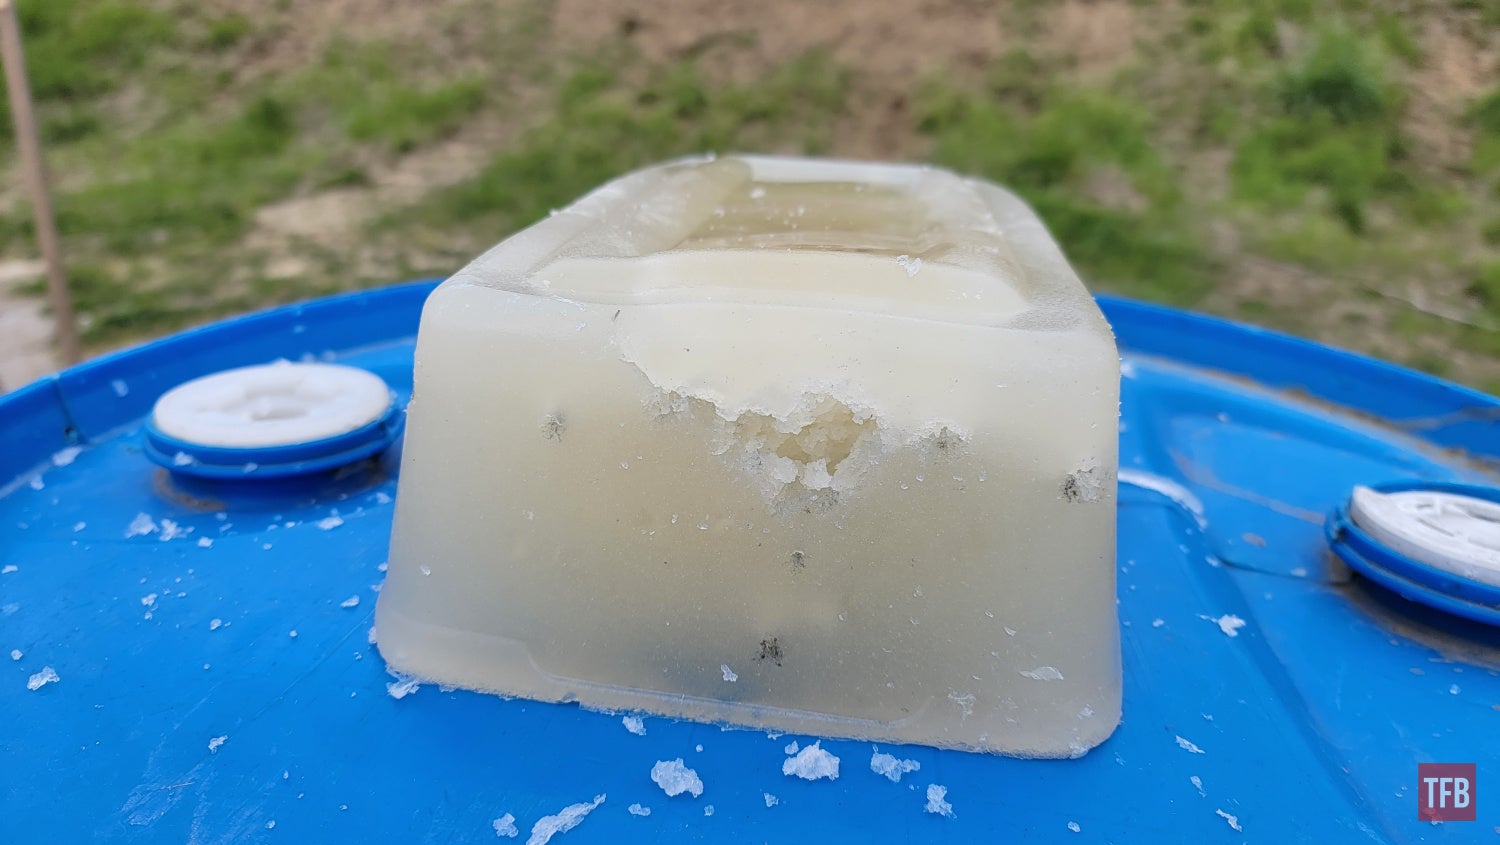 A DIY Guide to Making Your Own Affordable Ballistics Gel